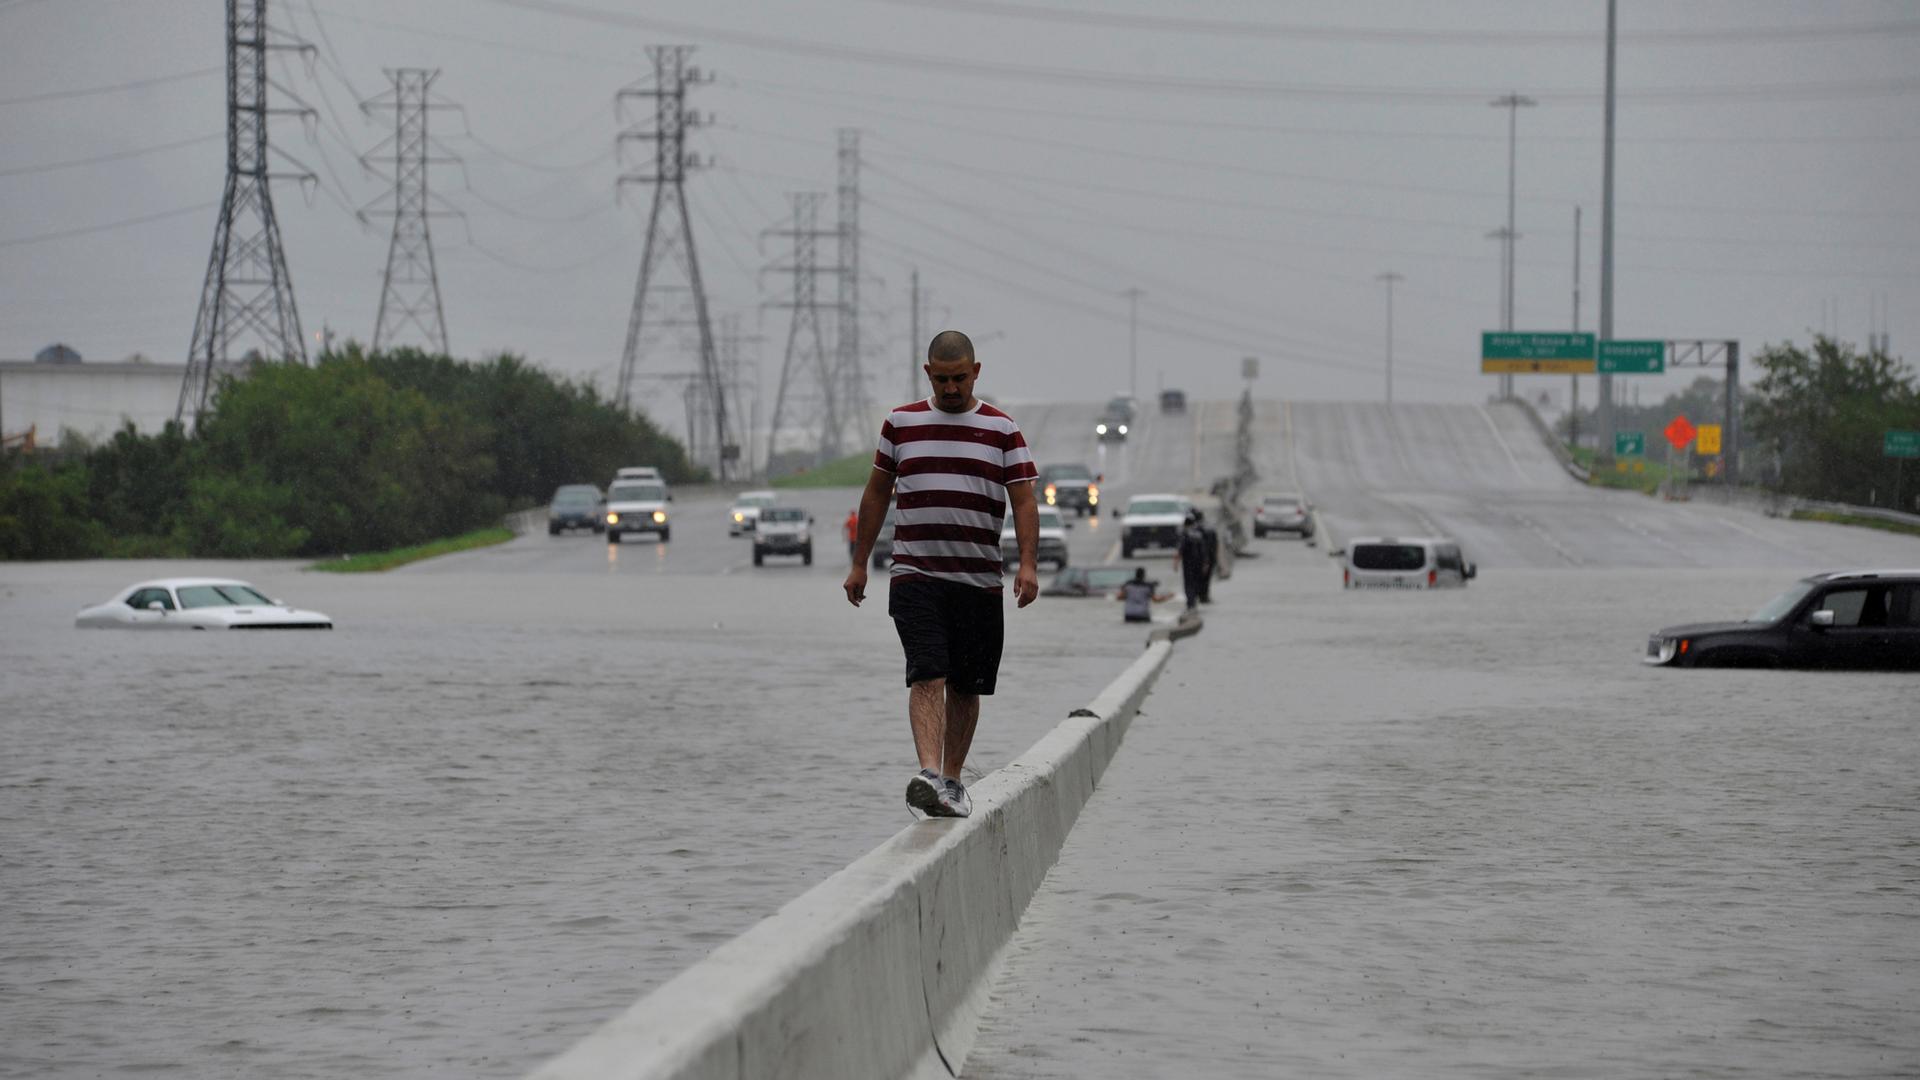 A stranded motorist escapes floodwaters on Interstate 225 after Hurricane Harvey inundated the Texas Gulf coast with rain causing mass flooding in Houston.